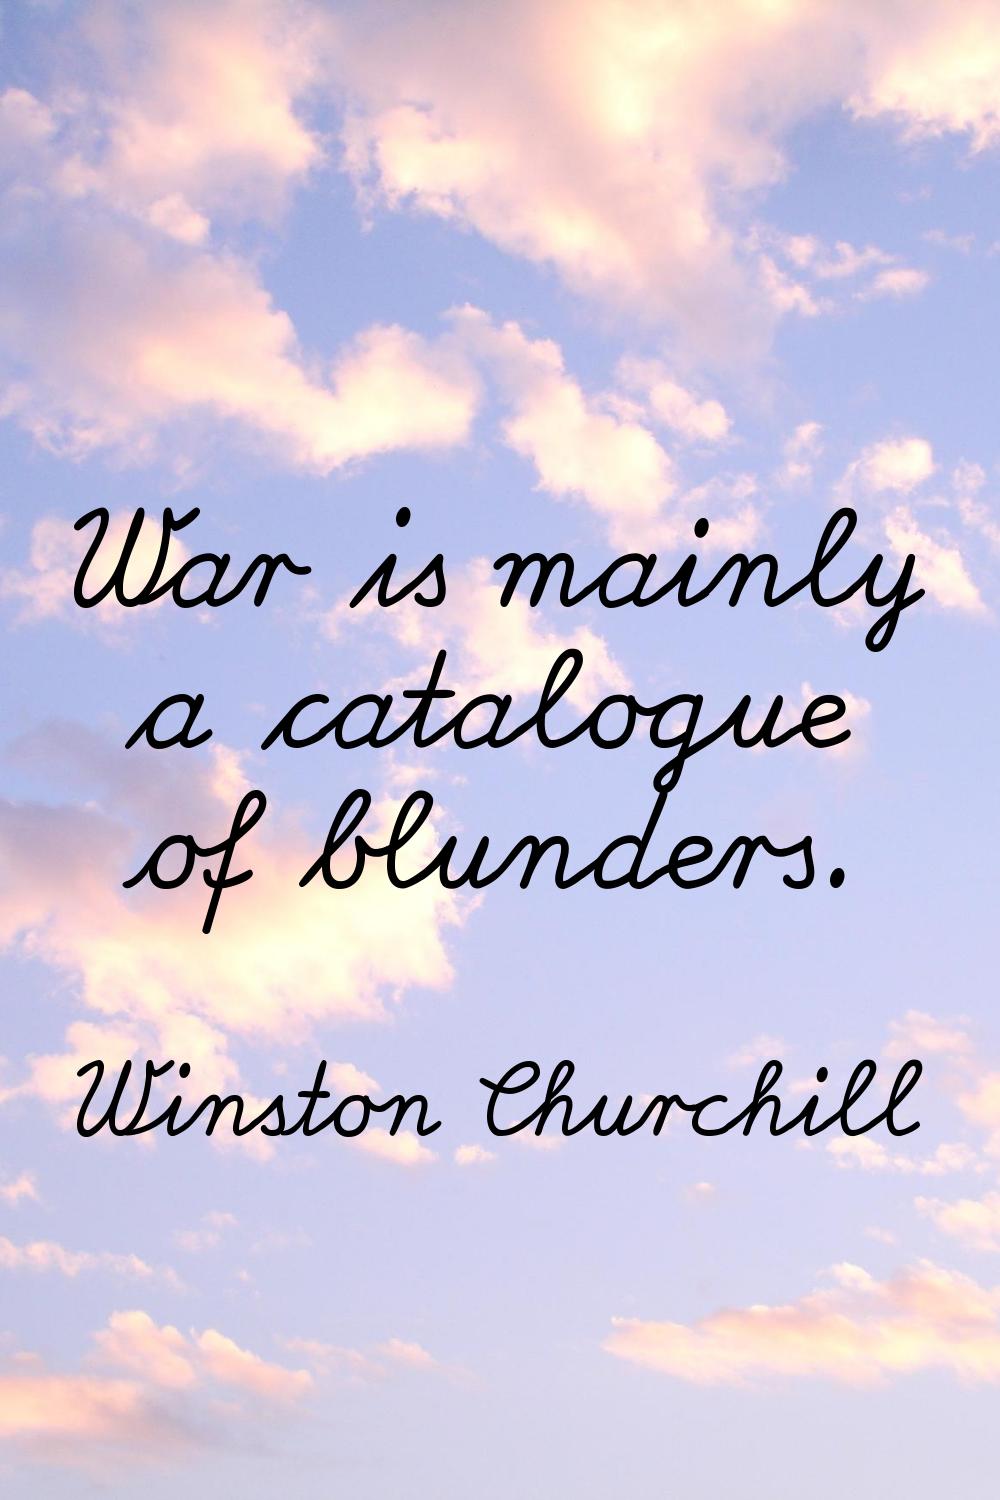 War is mainly a catalogue of blunders.